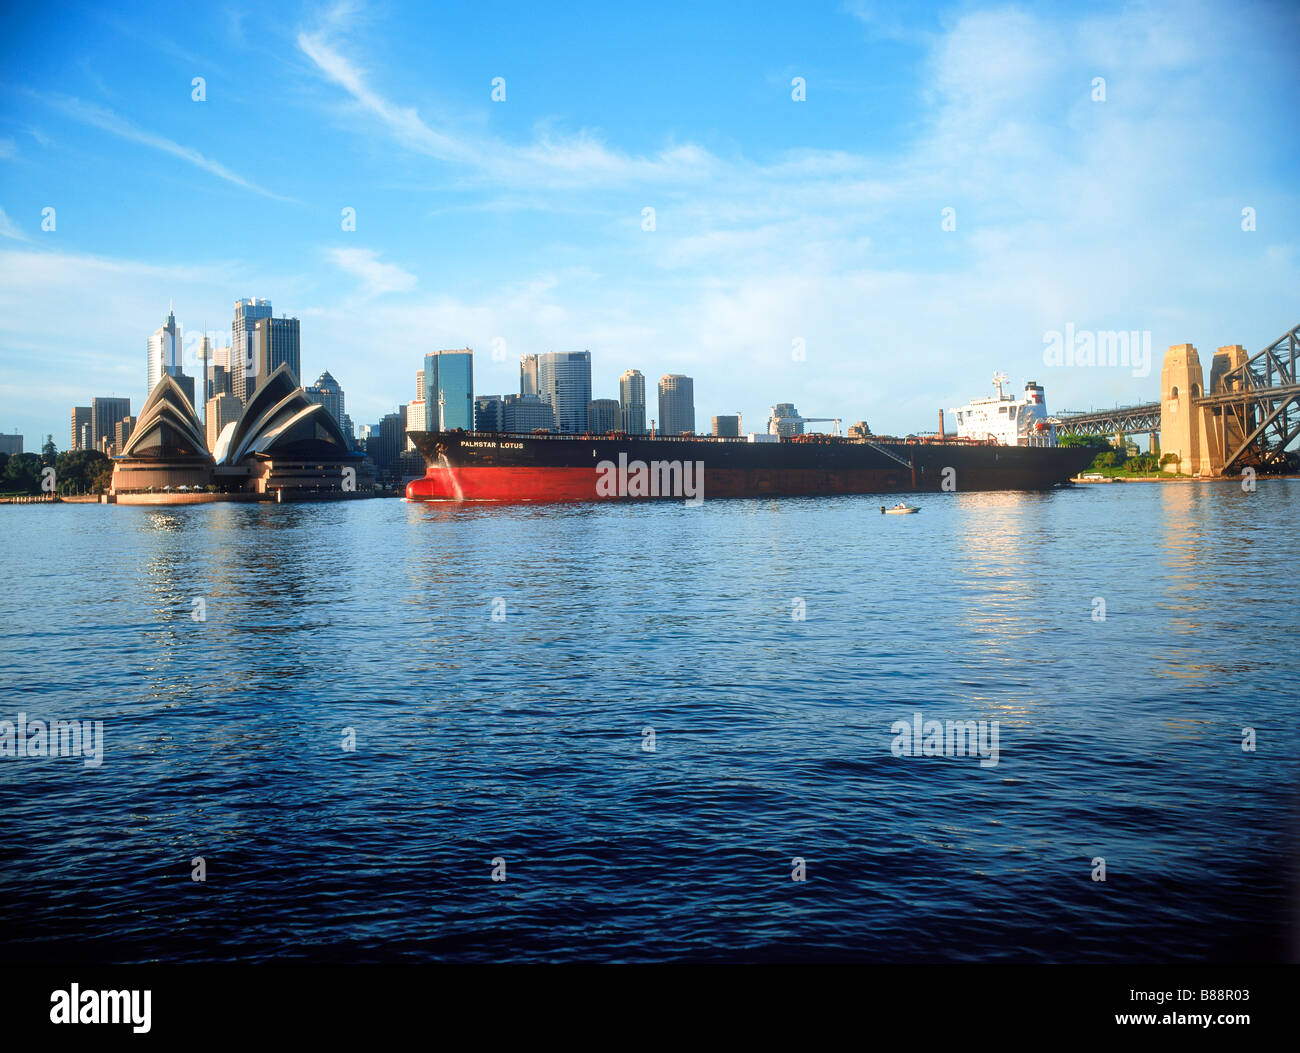 Oil tanker or cargo ship crossing Sydney Harbour with Opera House and city skyline at sunrise Stock Photo